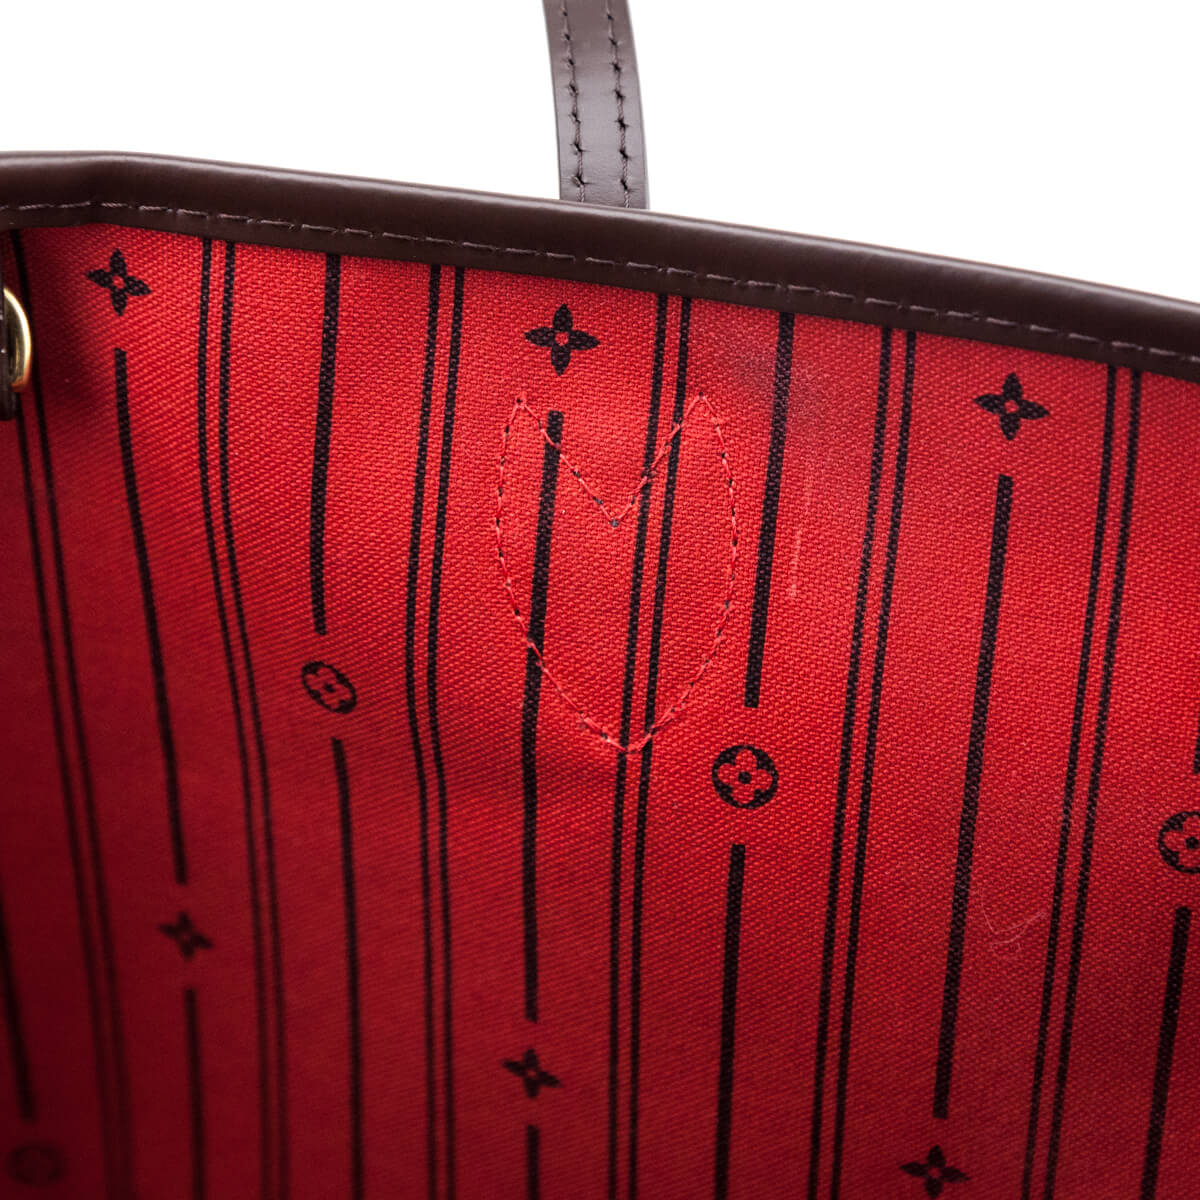 LOUIS VUITTON Neverfull Size MM Cerise N41358 Damier Ebene Canvas– GALLERY  RARE Global Online Store